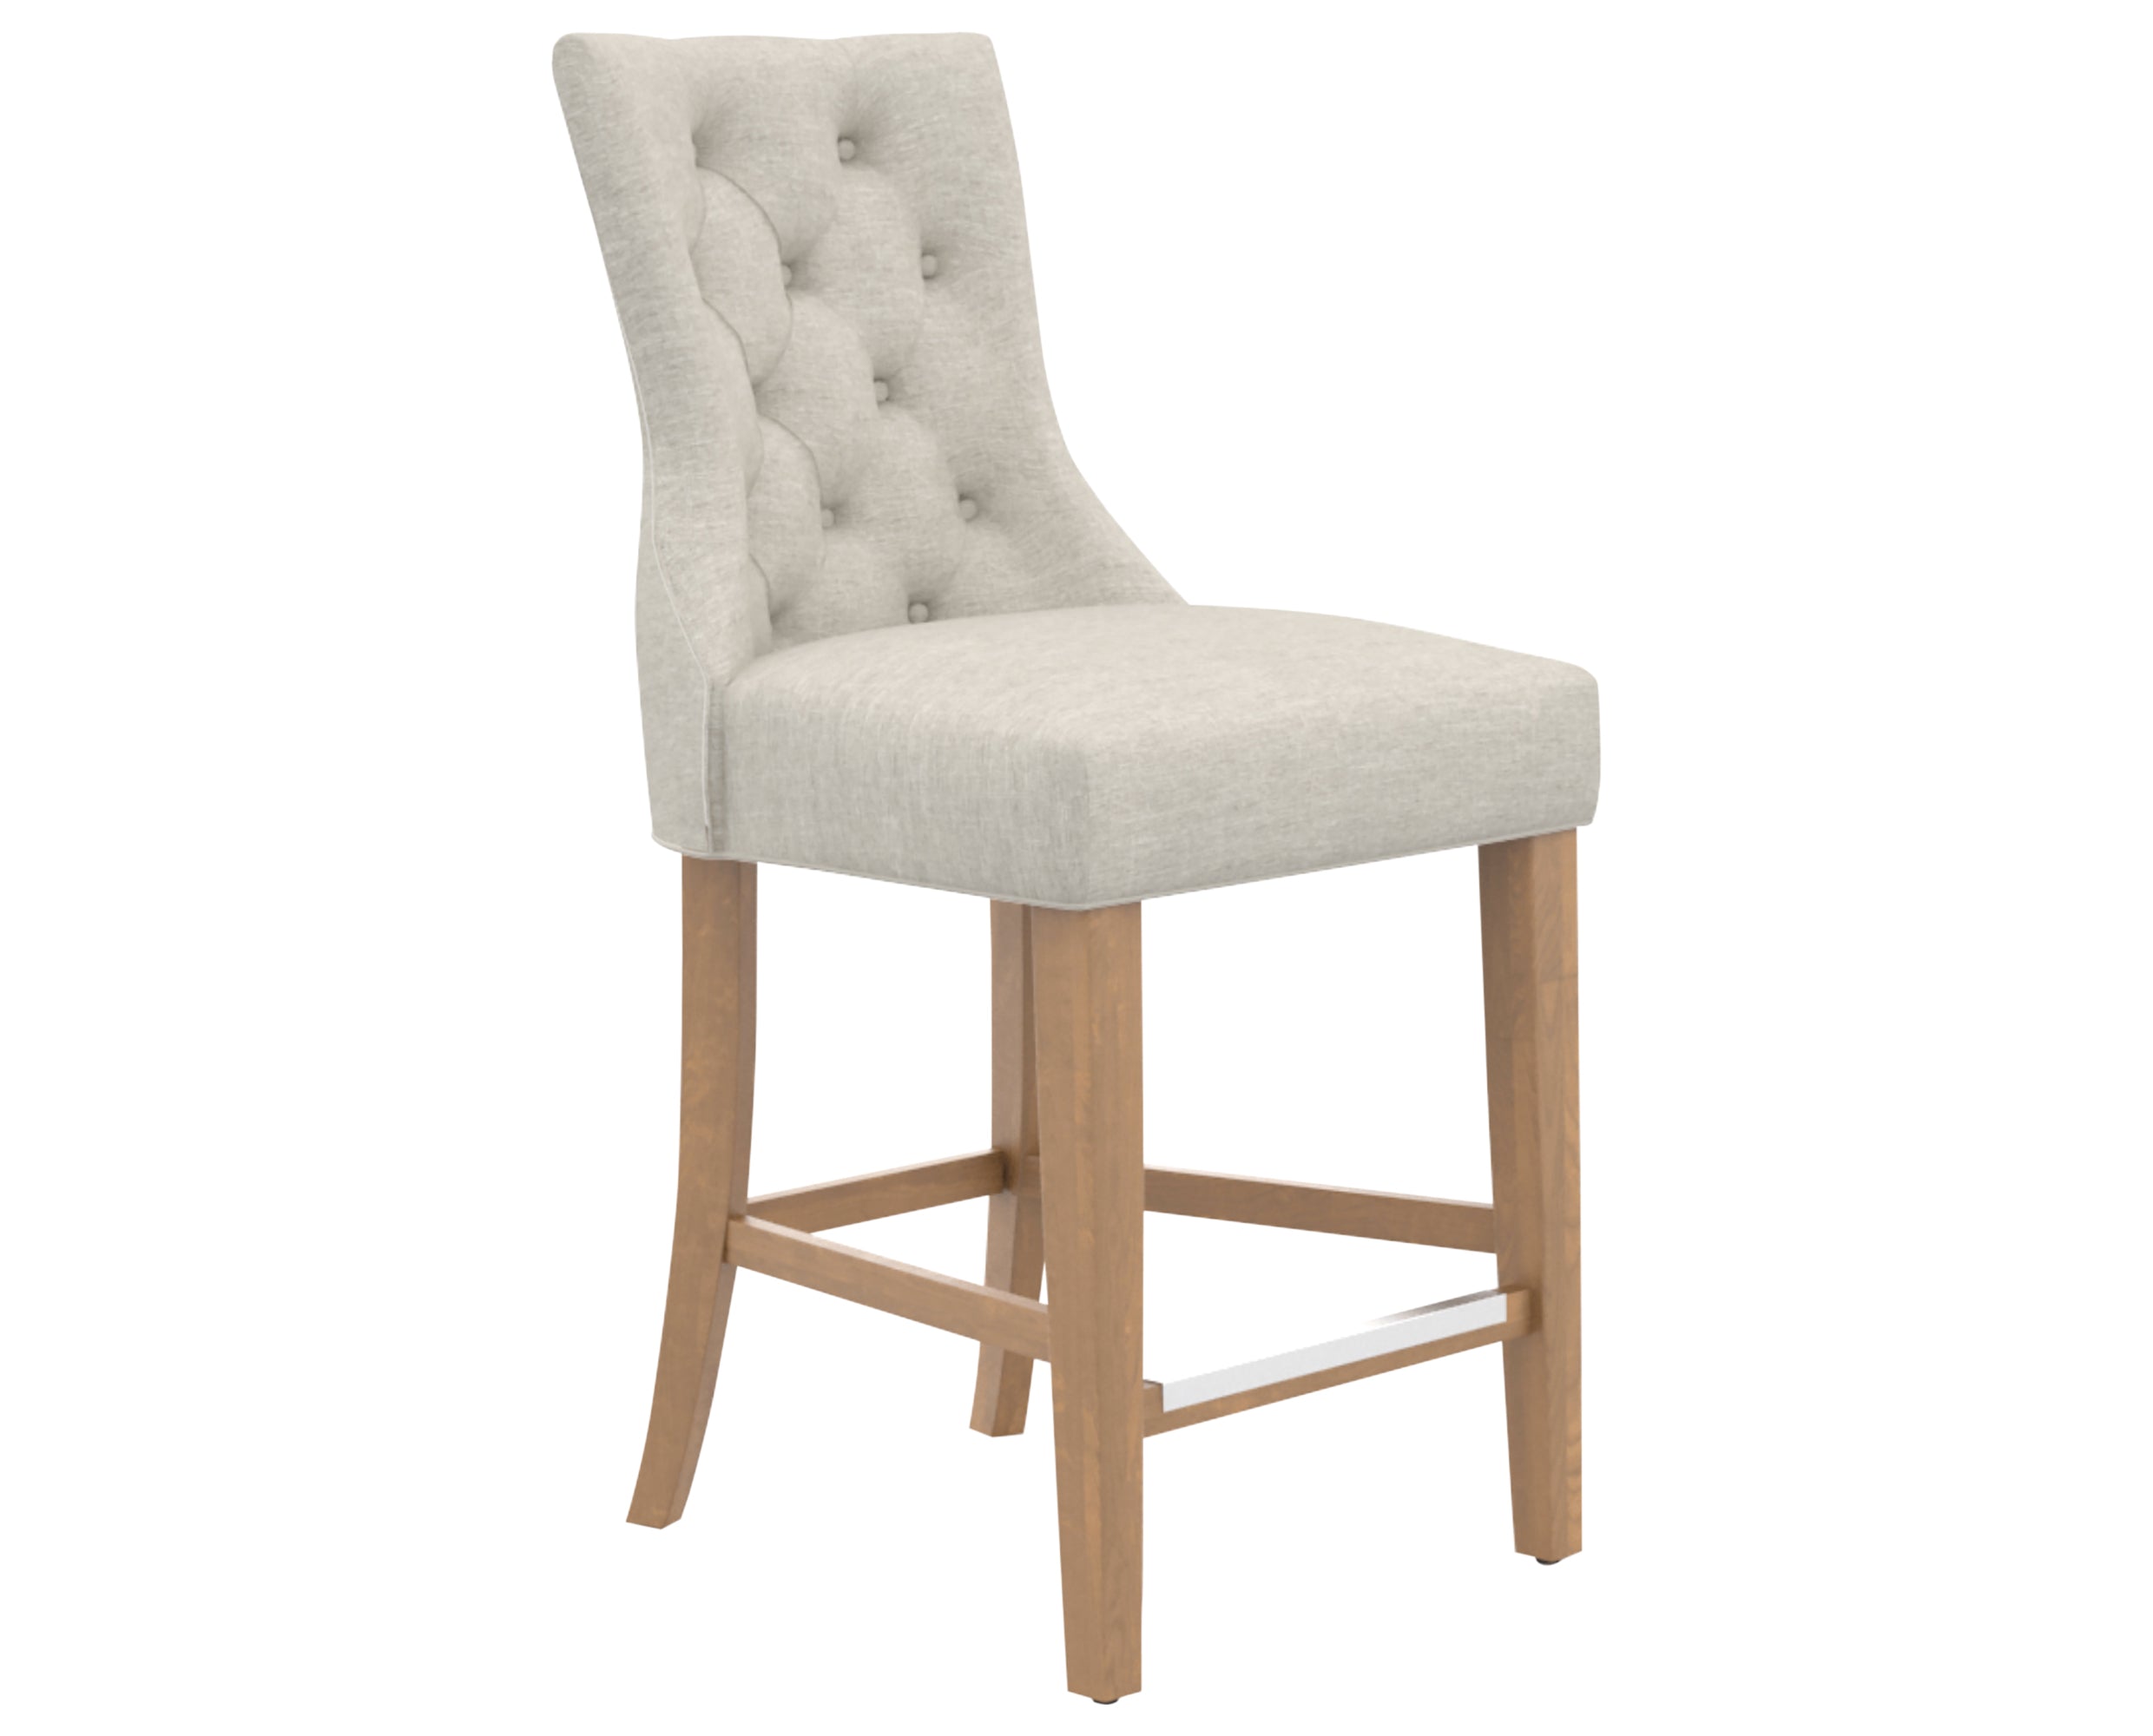 Honey Washed and Fabric TB | Canadel Farmhouse Counter Stool 817A | Valley Ridge Furniture